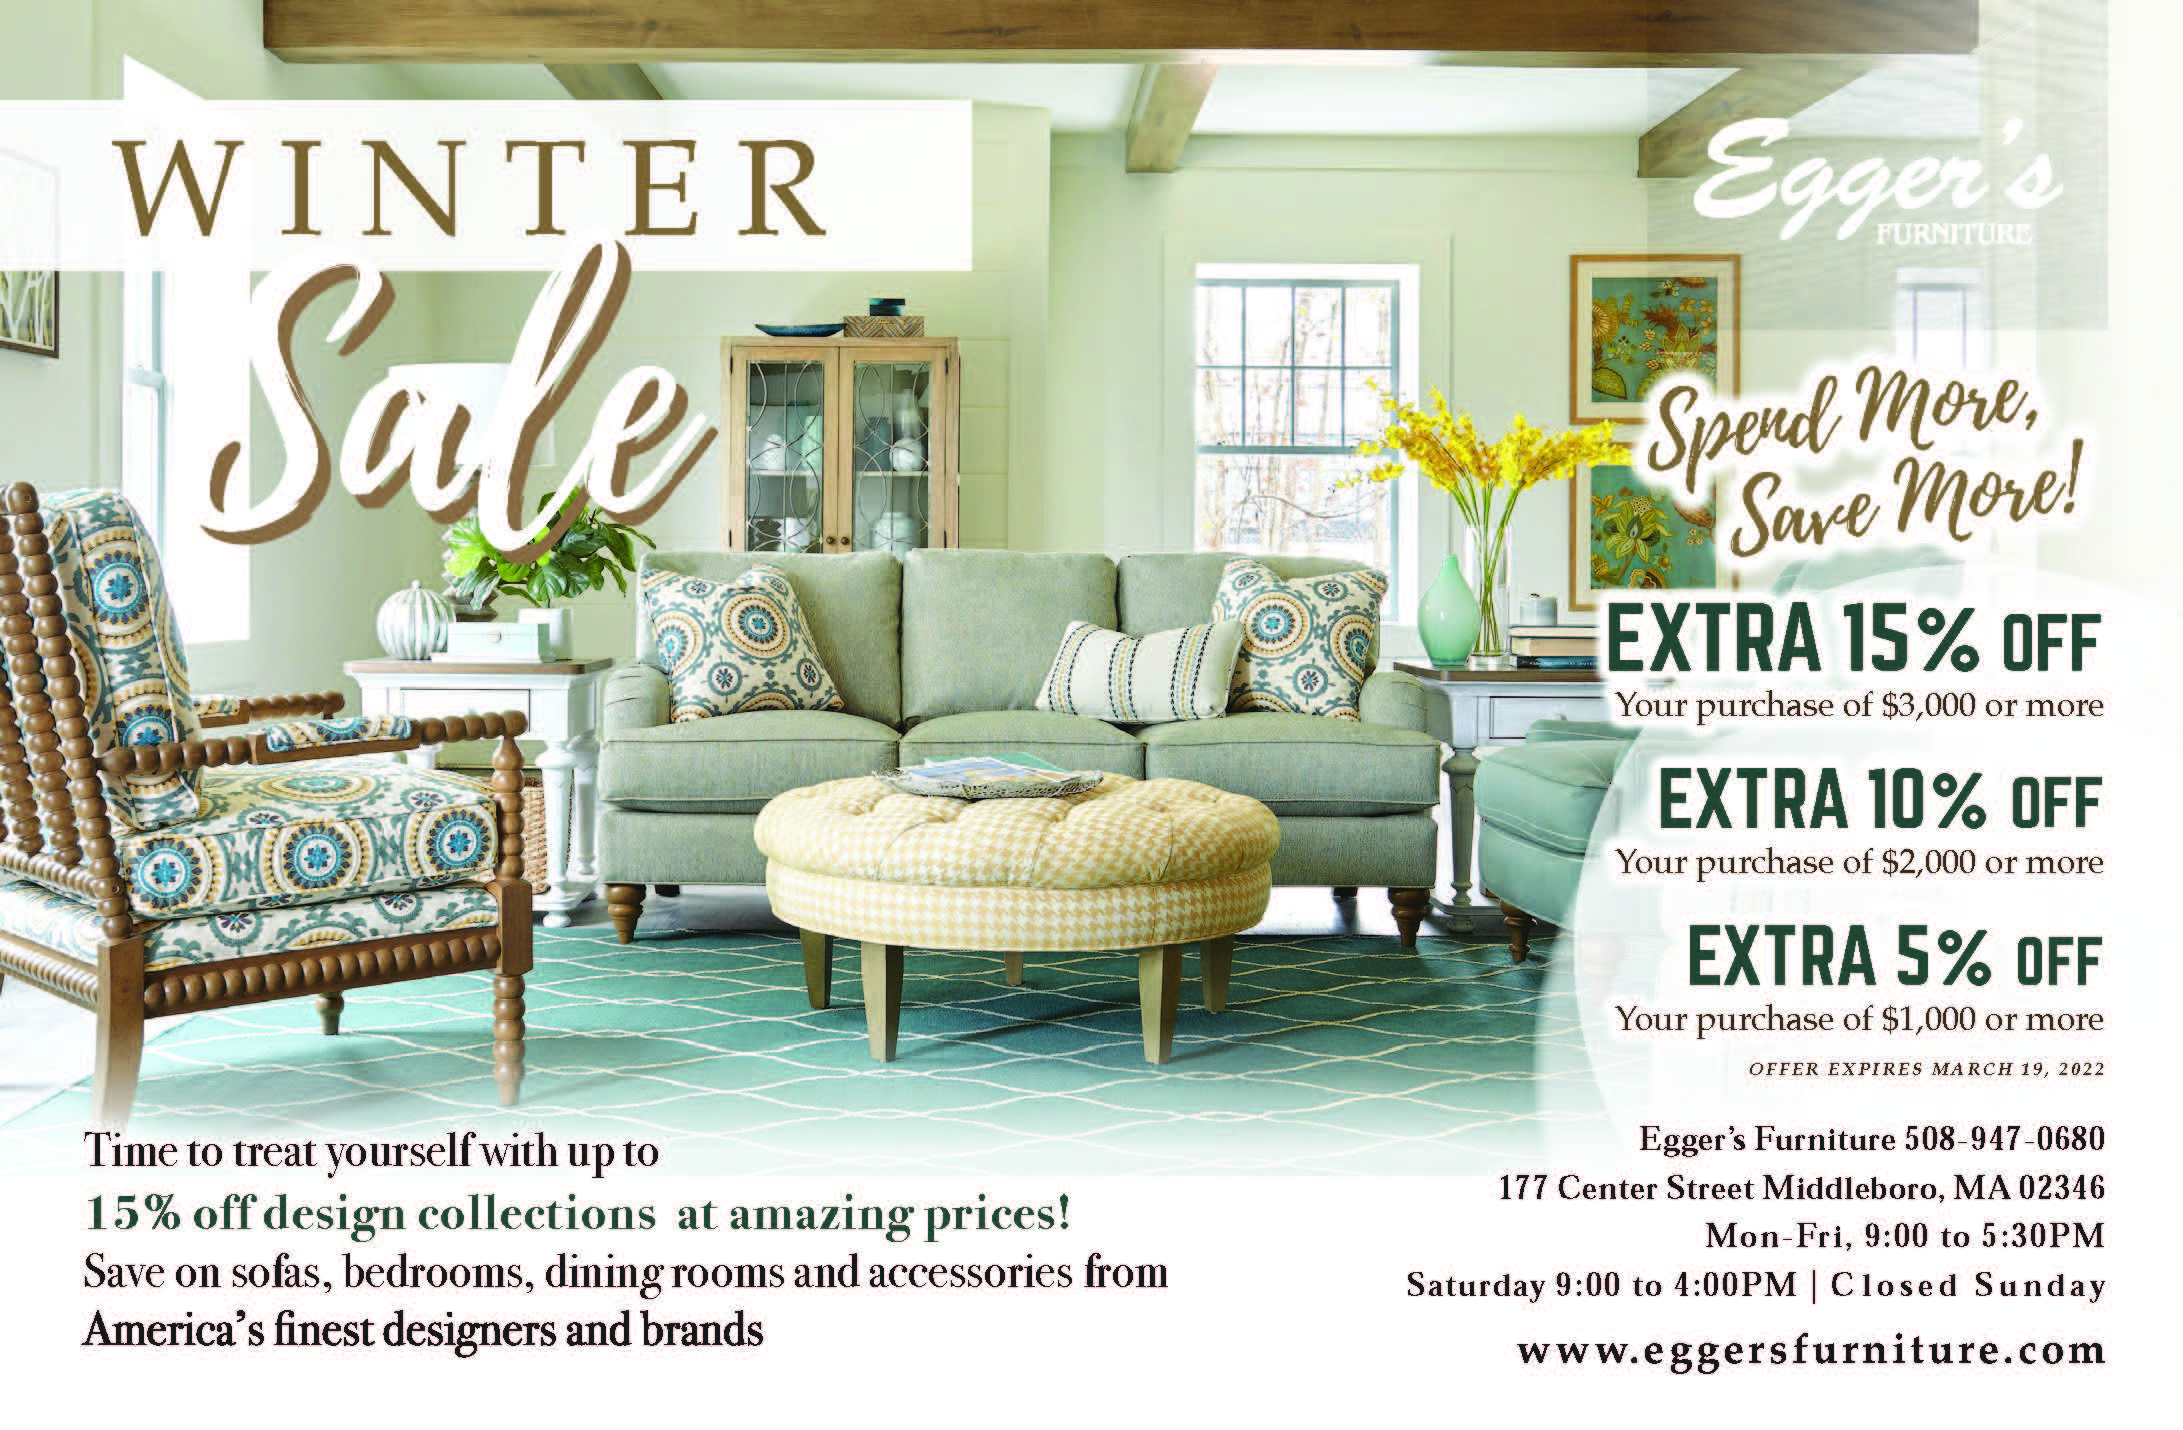 Winter sale ad with discount pricing and picture of living room set